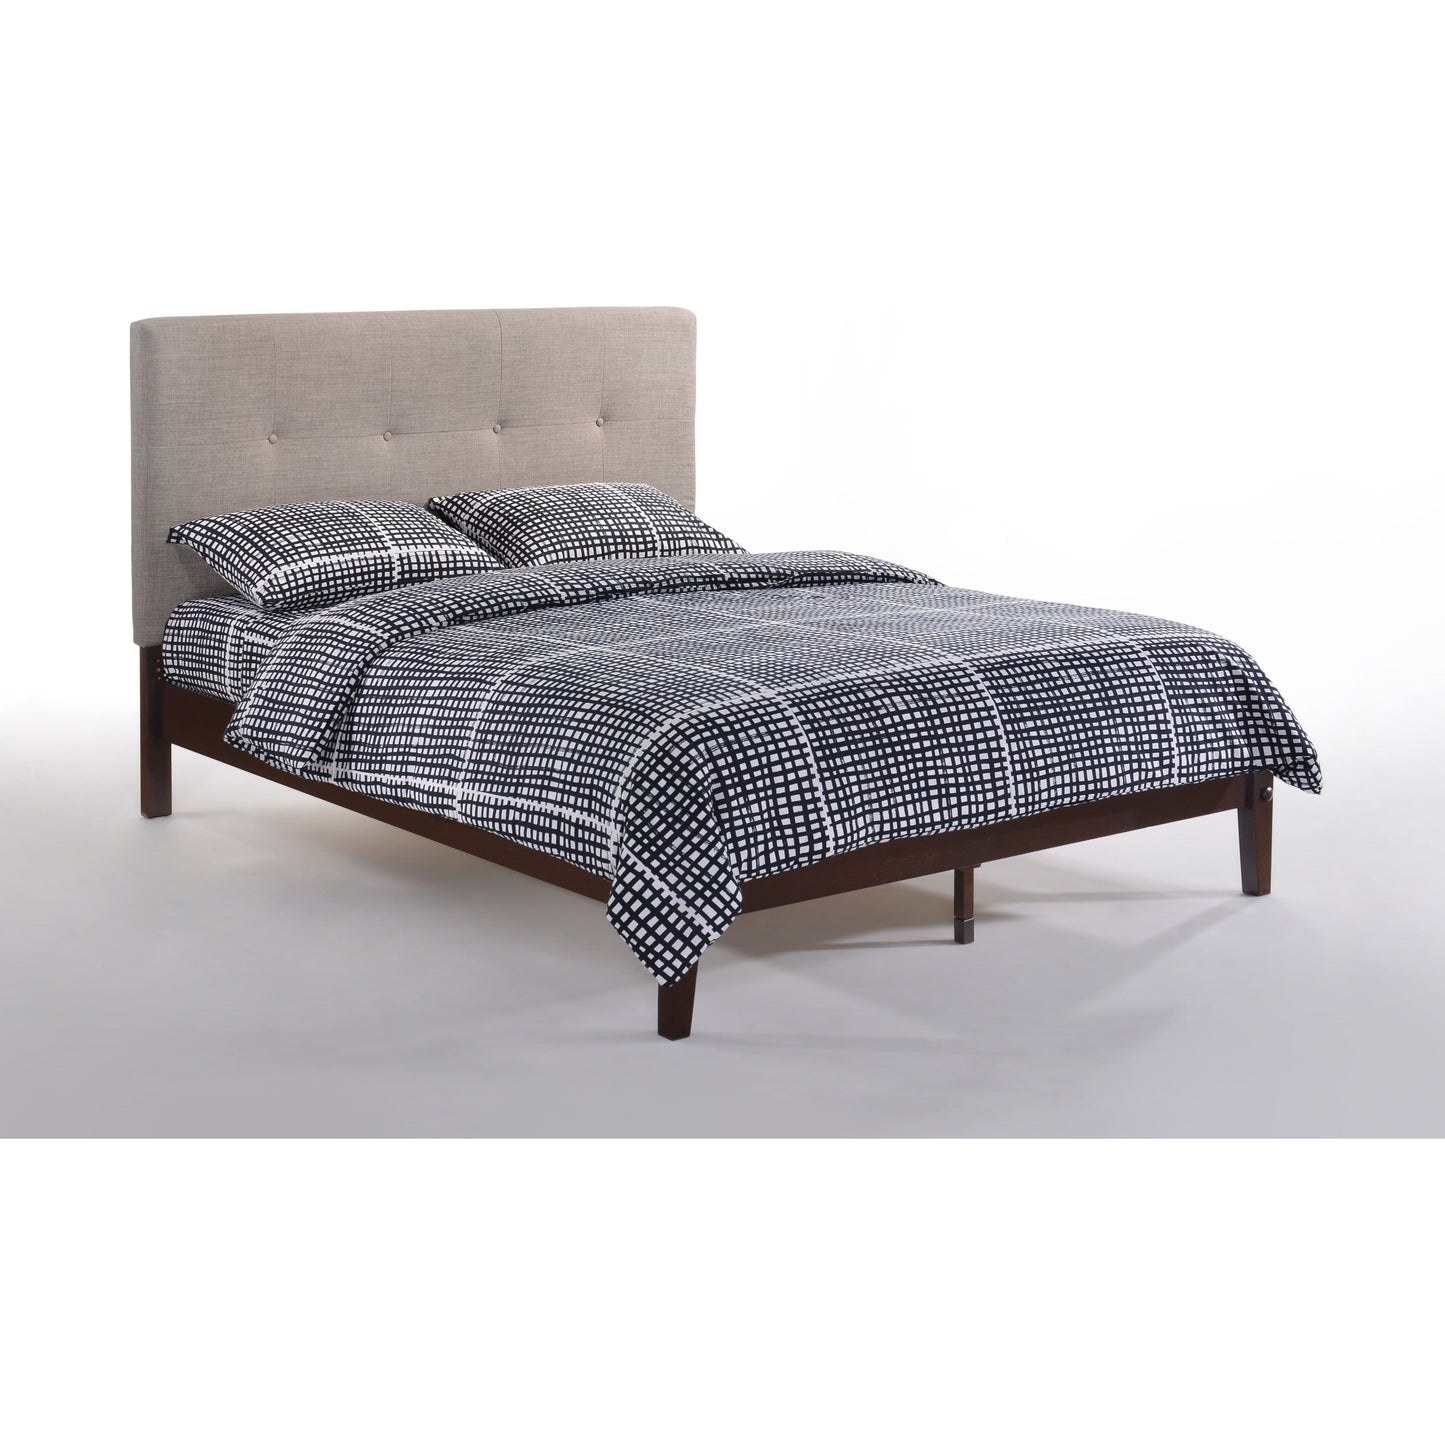 Night and Day Paprika Full Bed in Charcoal with Chocolate Finish Frame (K Series) Grey PAP-KH-FUL-CC-GY-COM